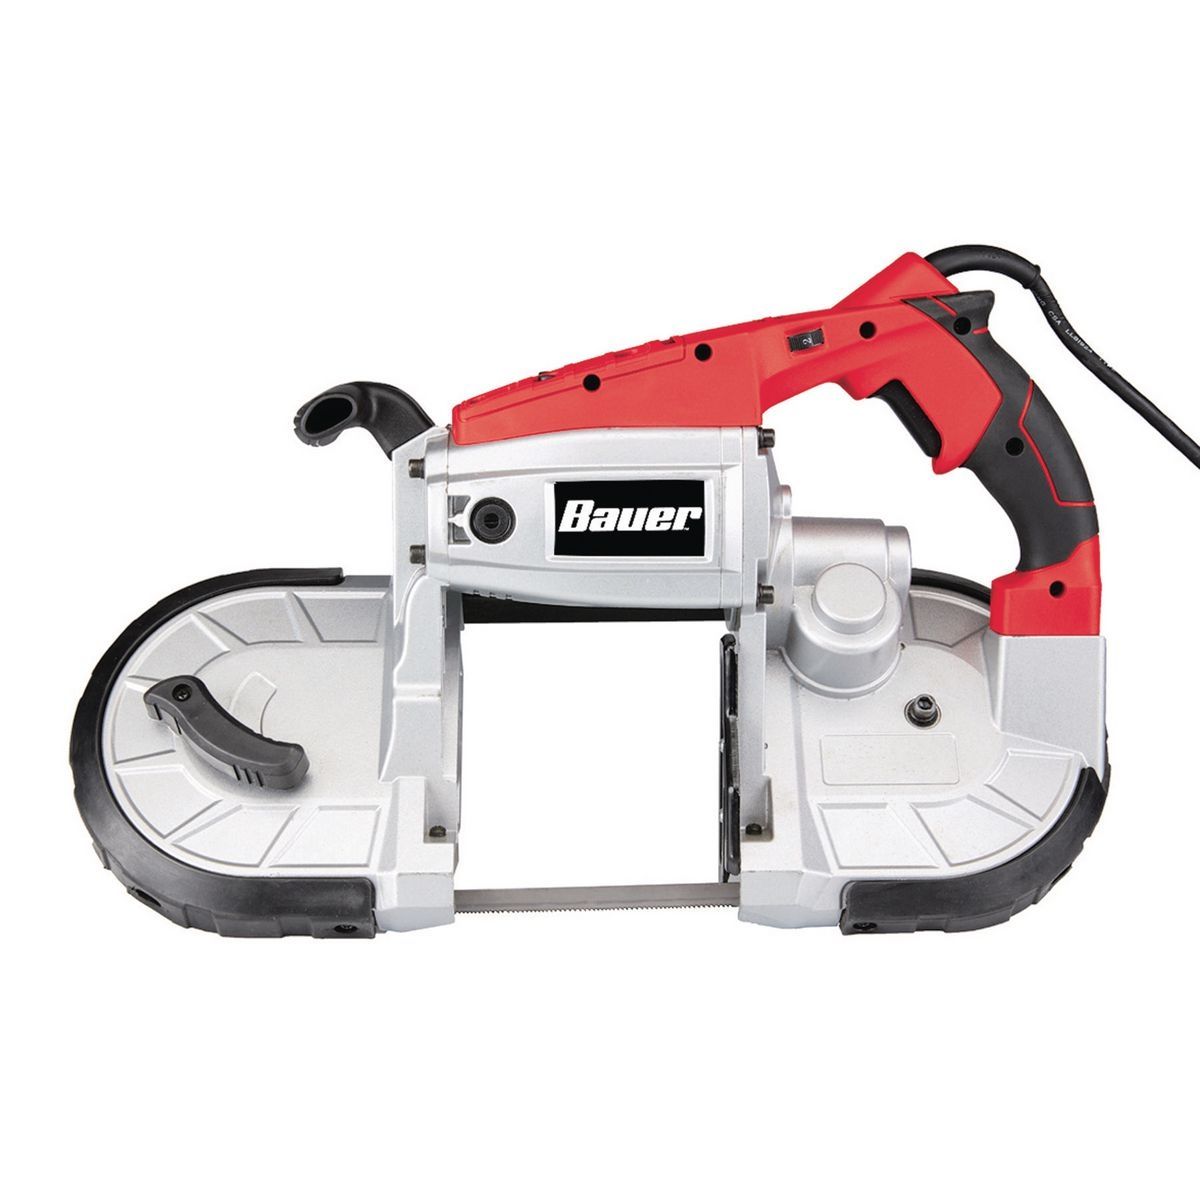 BAUER 10 Amp Deep Cut Variable Speed Band Saw